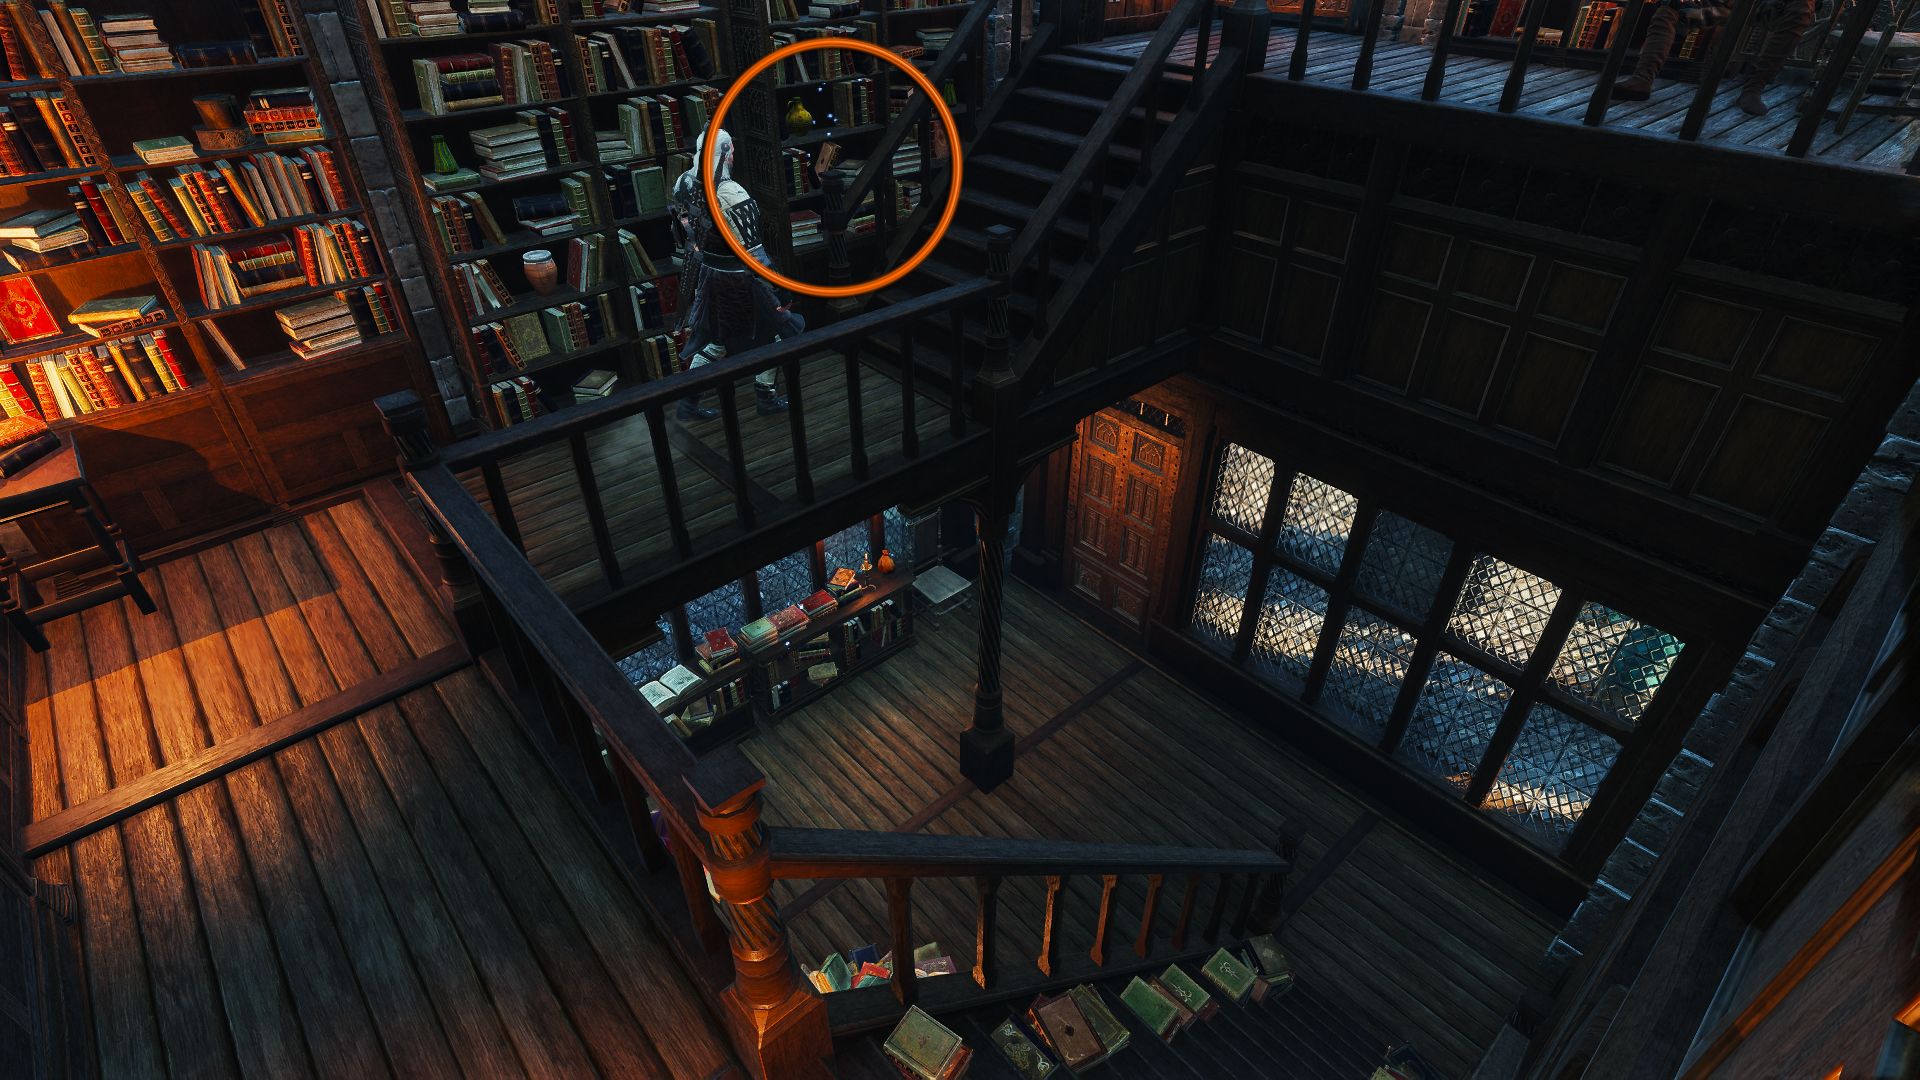 An annotated image of Geralt walking through a bookstore with an orange circle indicating where a book can be found.